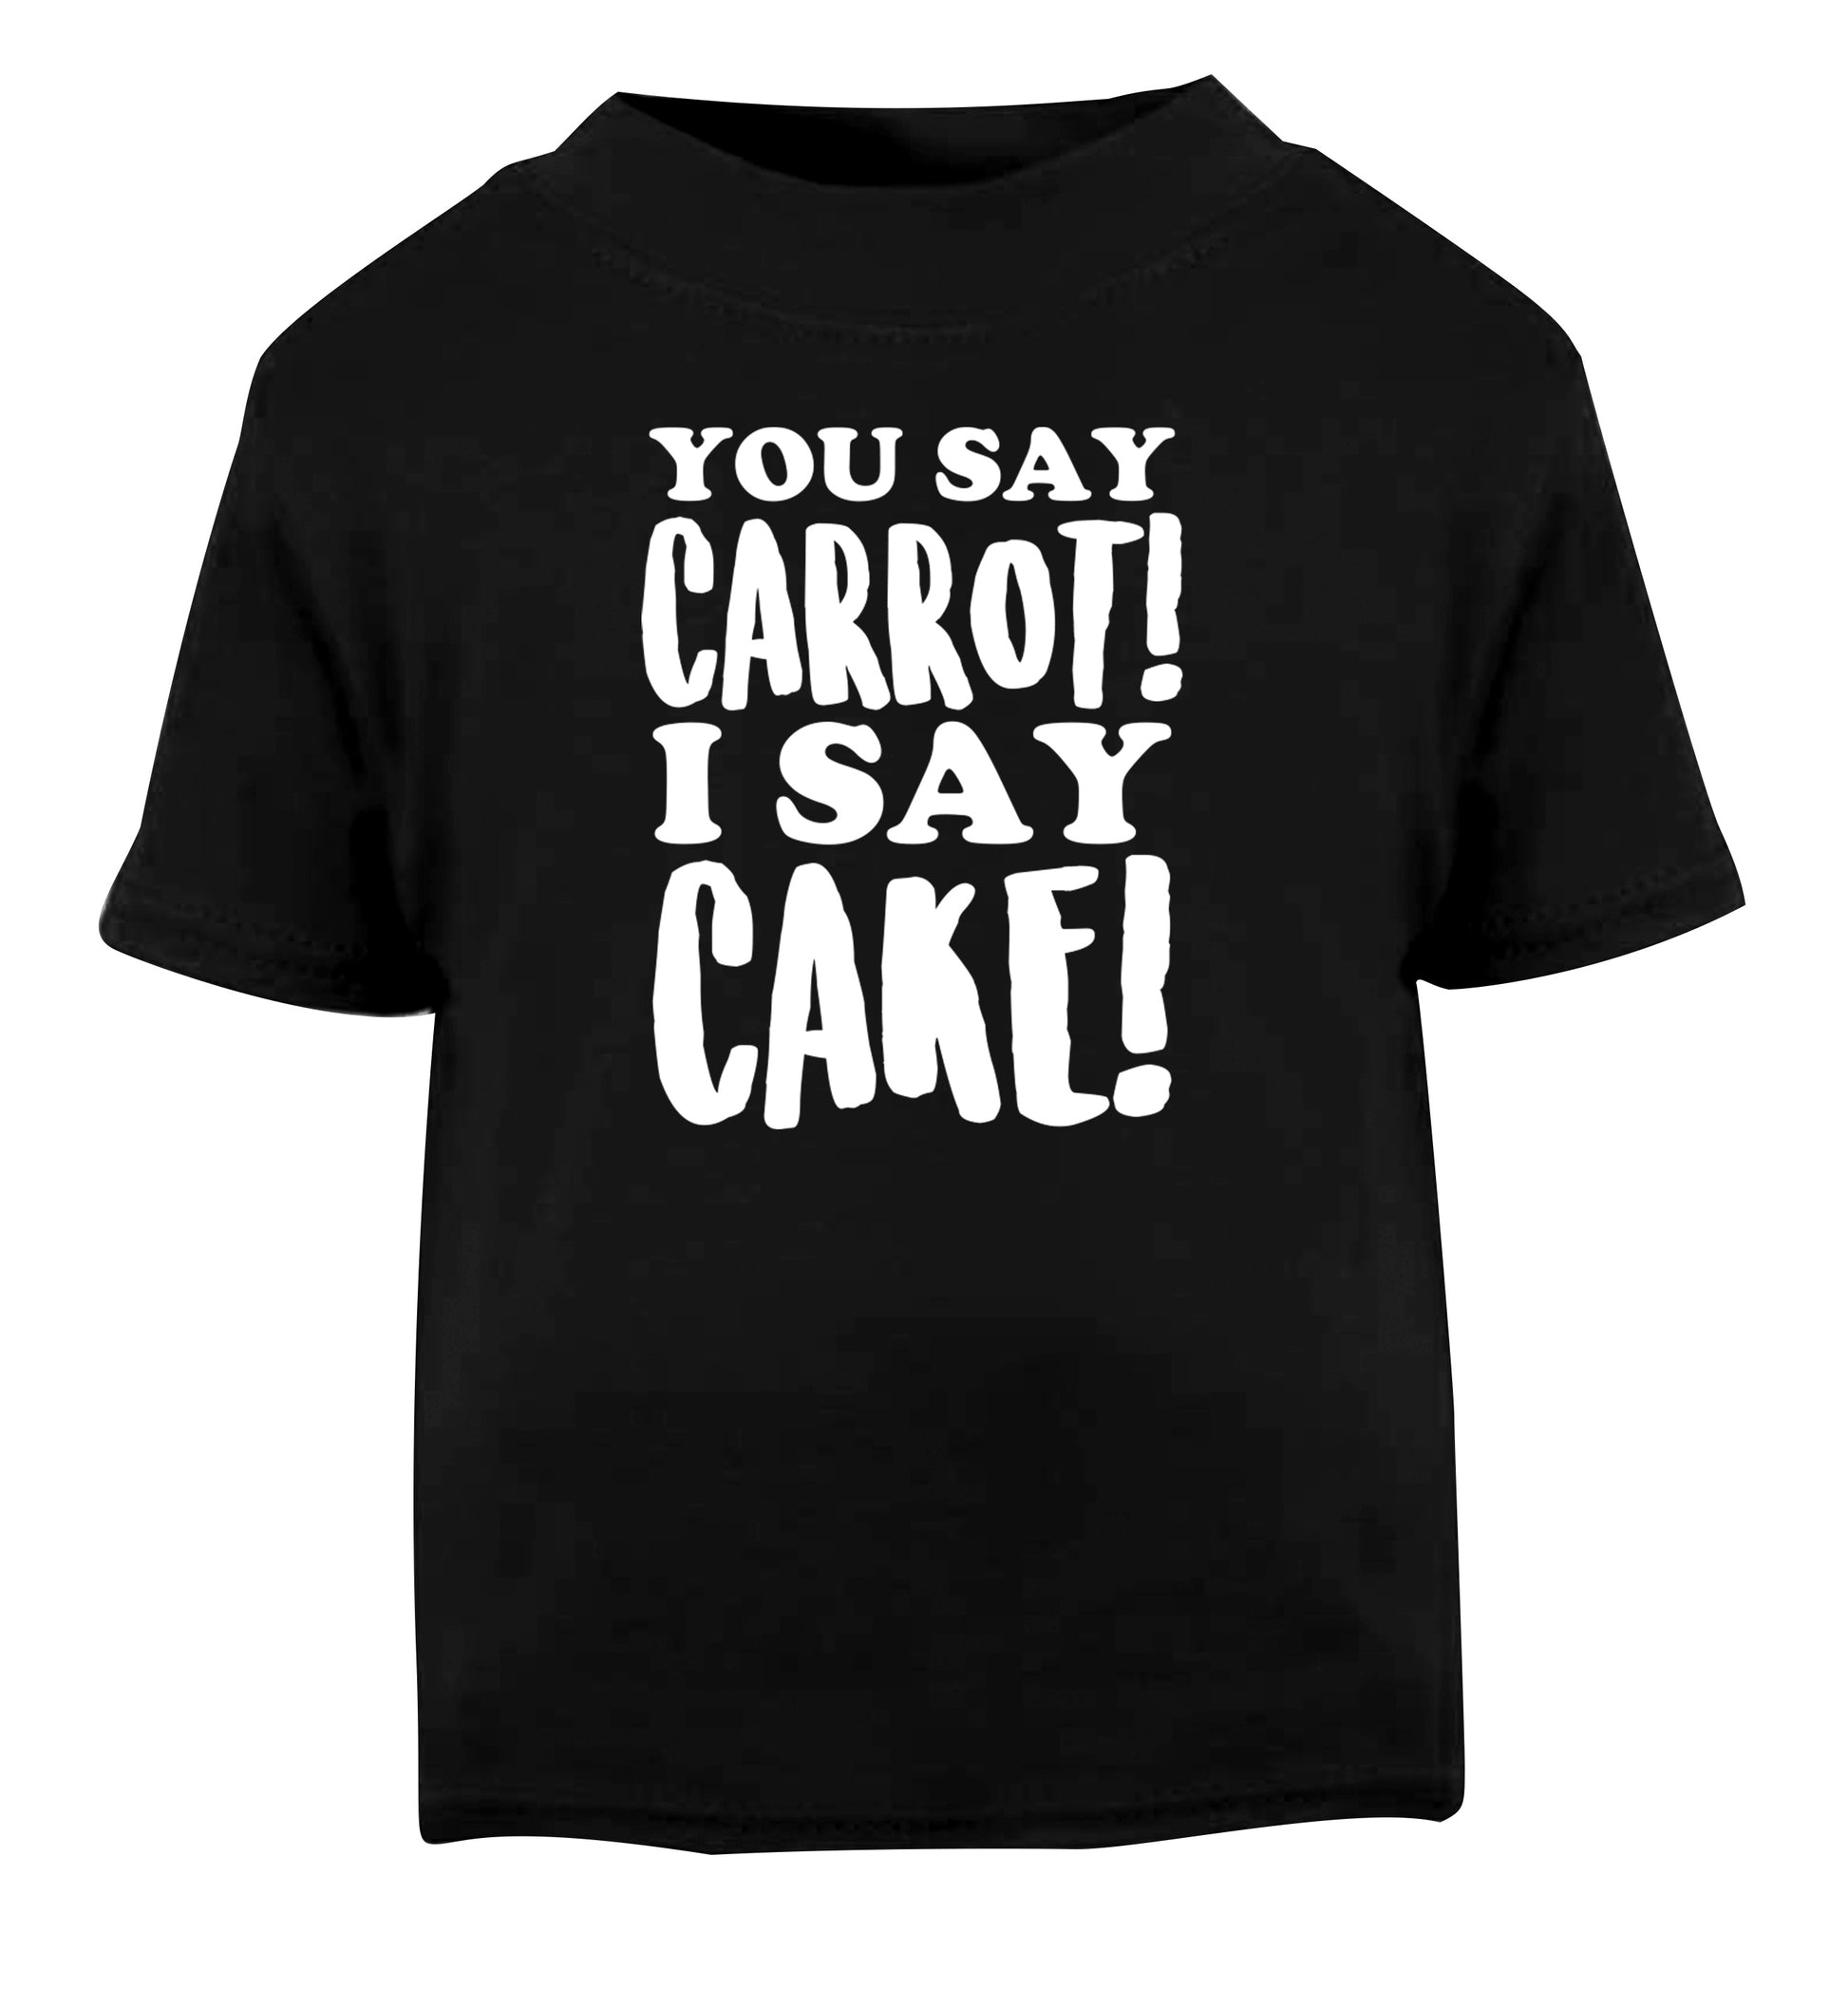 You say carrot I say cake! Black Baby Toddler Tshirt 2 years